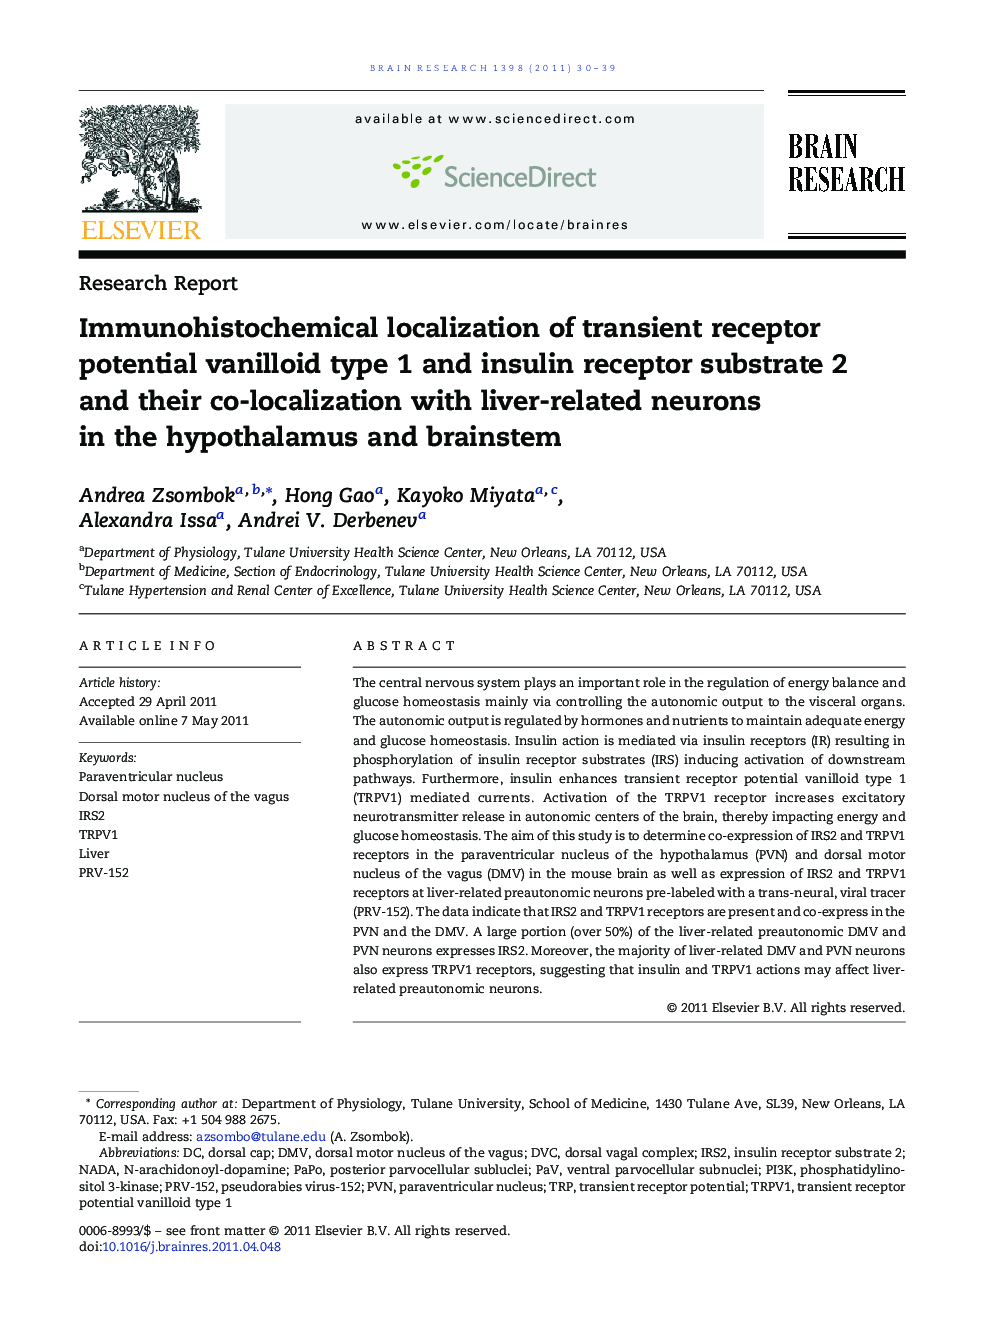 Immunohistochemical localization of transient receptor potential vanilloid type 1 and insulin receptor substrate 2 and their co-localization with liver-related neurons in the hypothalamus and brainstem